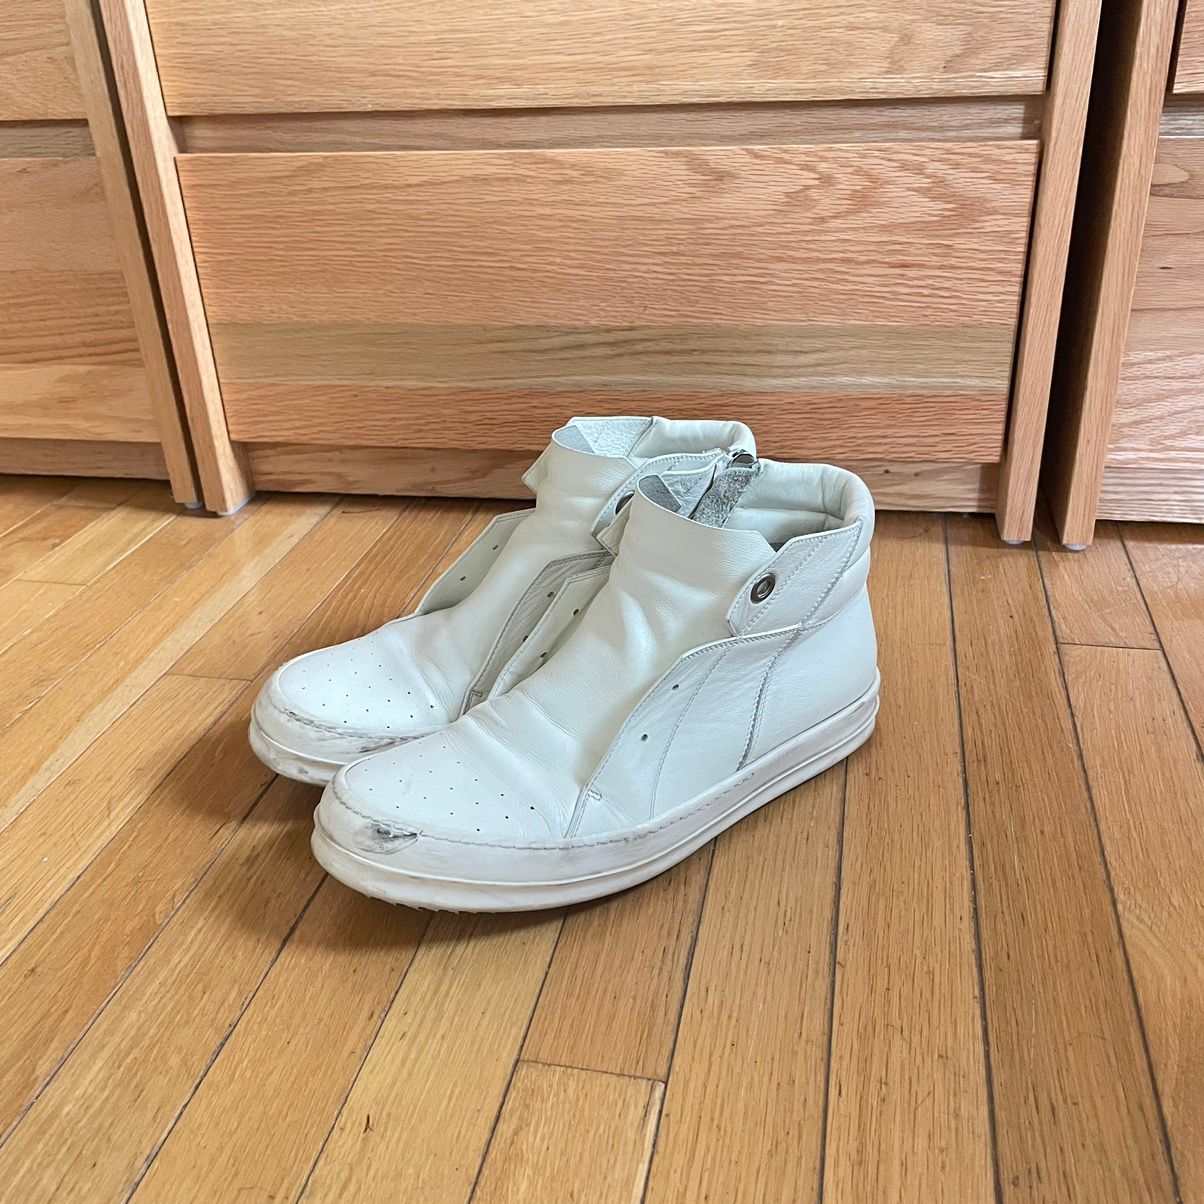 Pre-owned Rick Owens Island Dunks Cream White Shoes